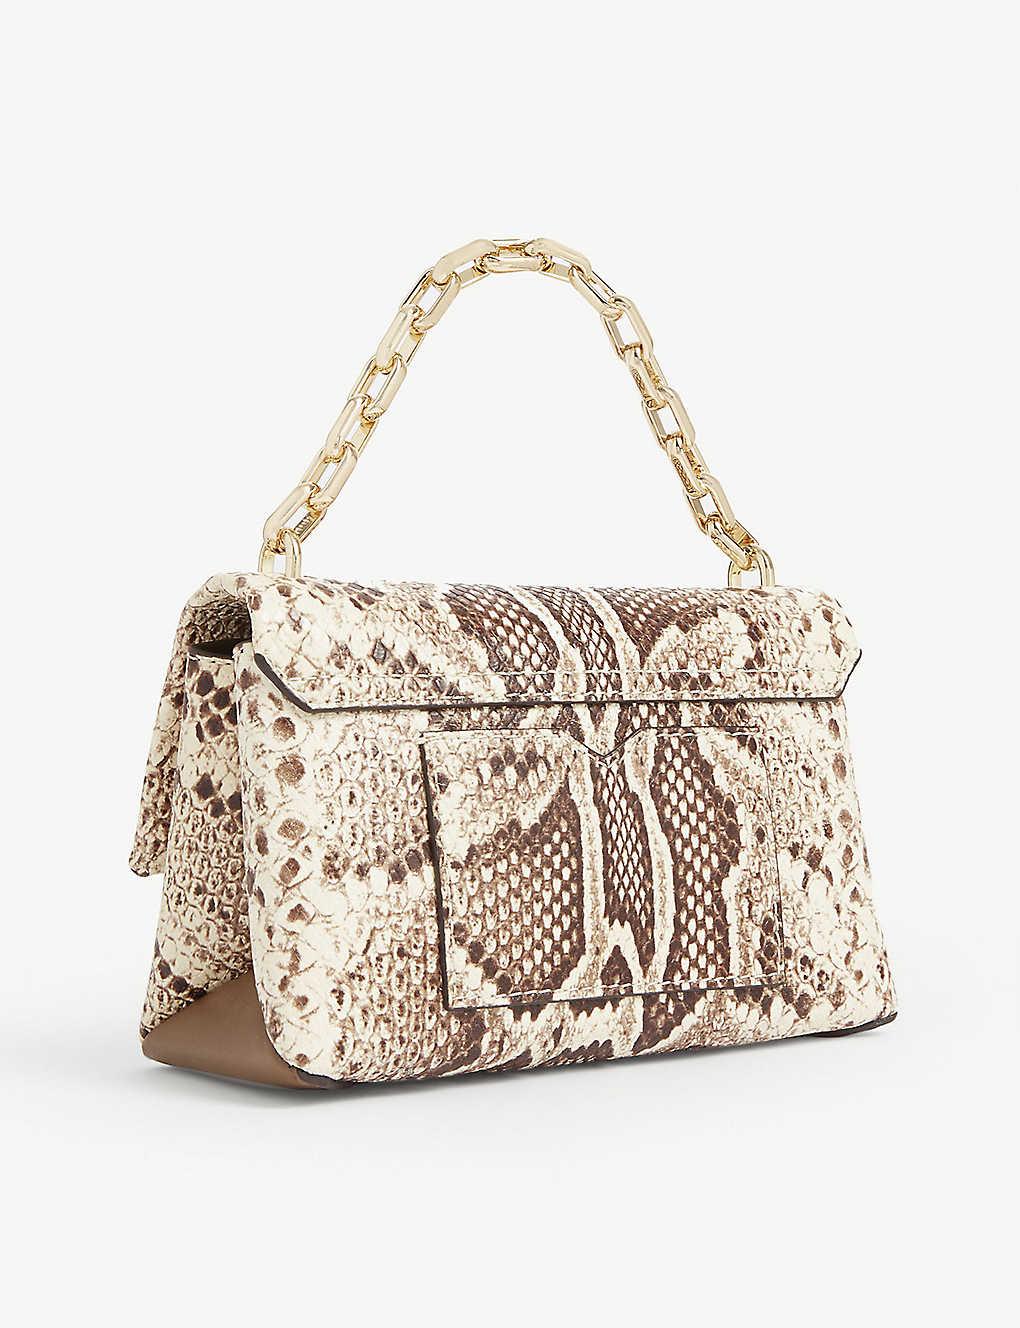 Piper Small Two-Tone Snake Embossed Leather Shoulder Bag | Michael Kors